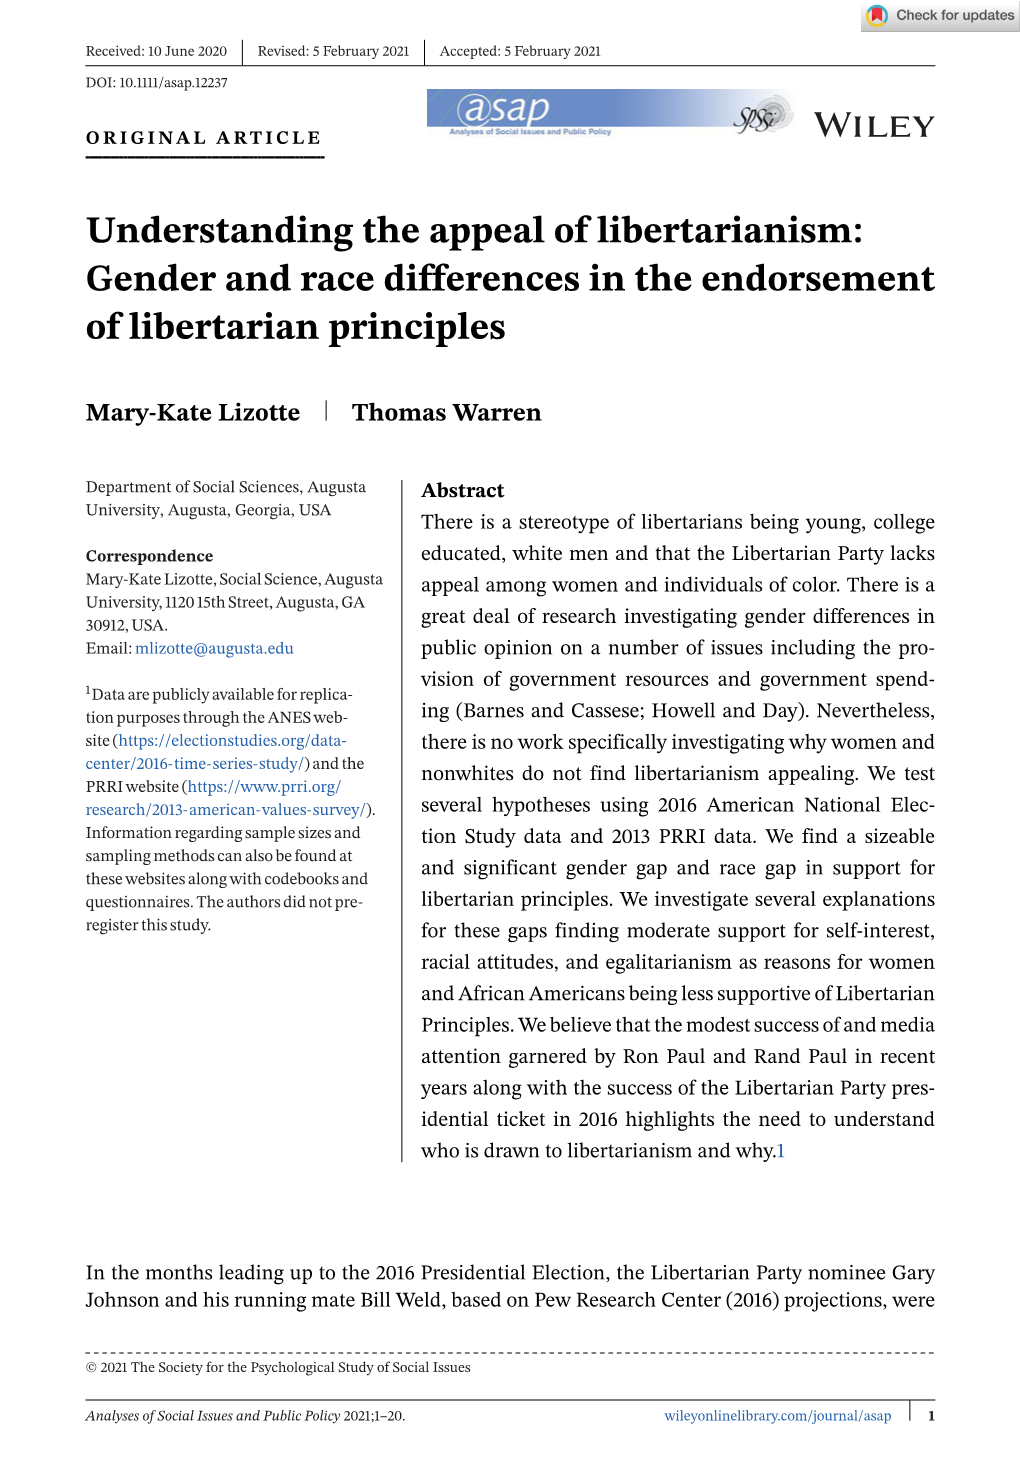 Gender and Race Differences in the Endorsement of Libertarian Principles